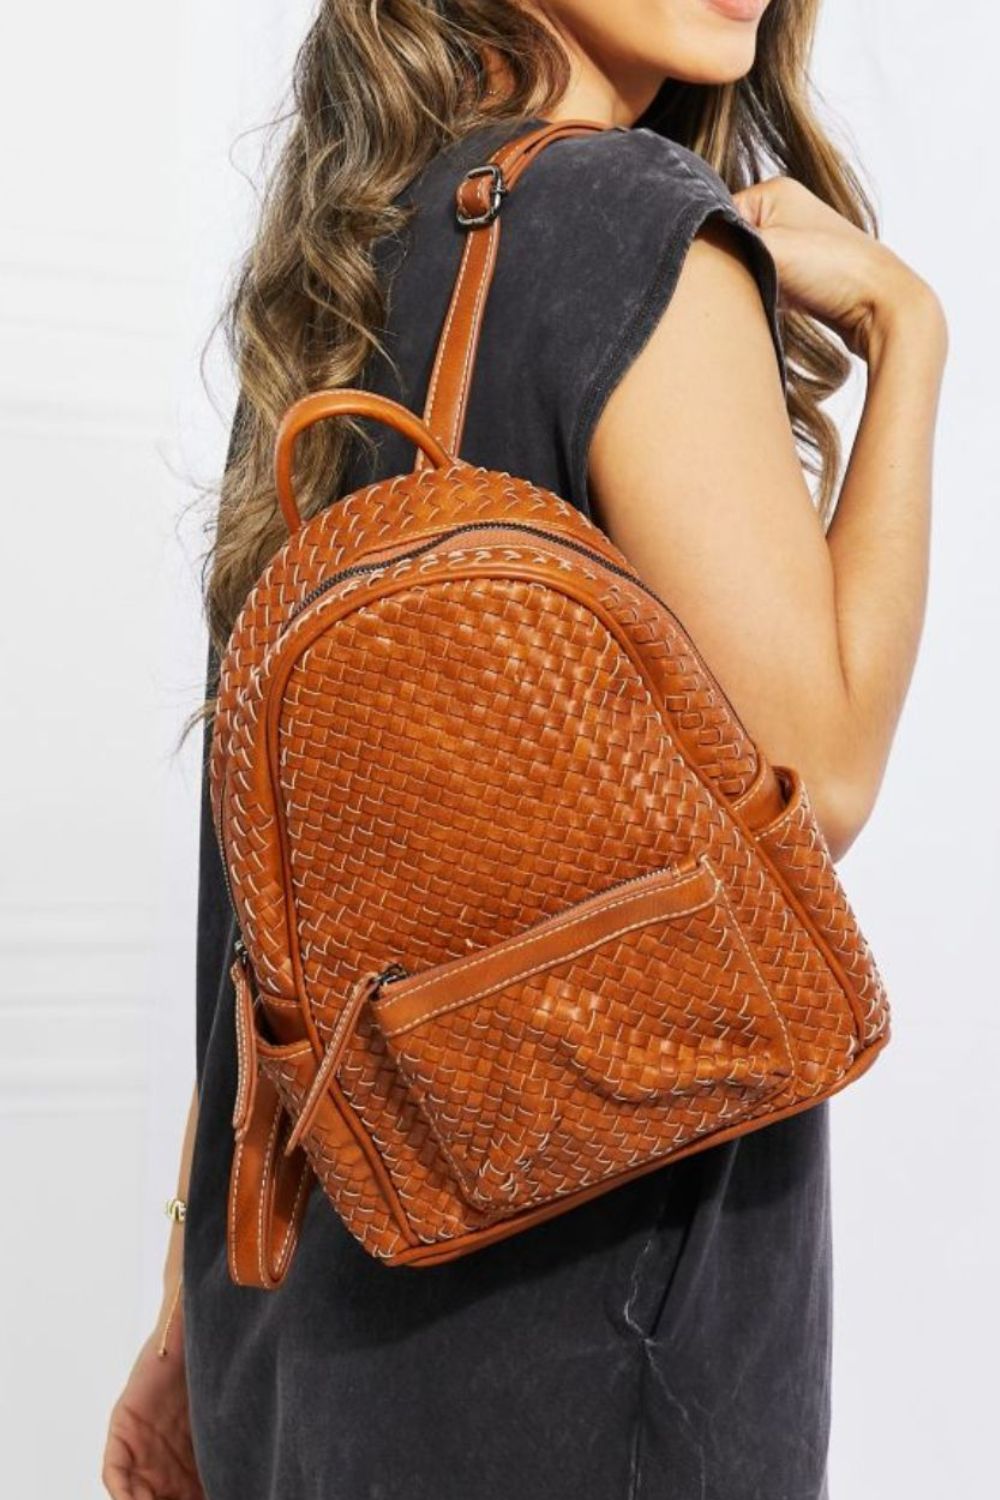 SHOMICO Certainly Chic Faux Leather Woven Backpack - Handbag - FITGGINS